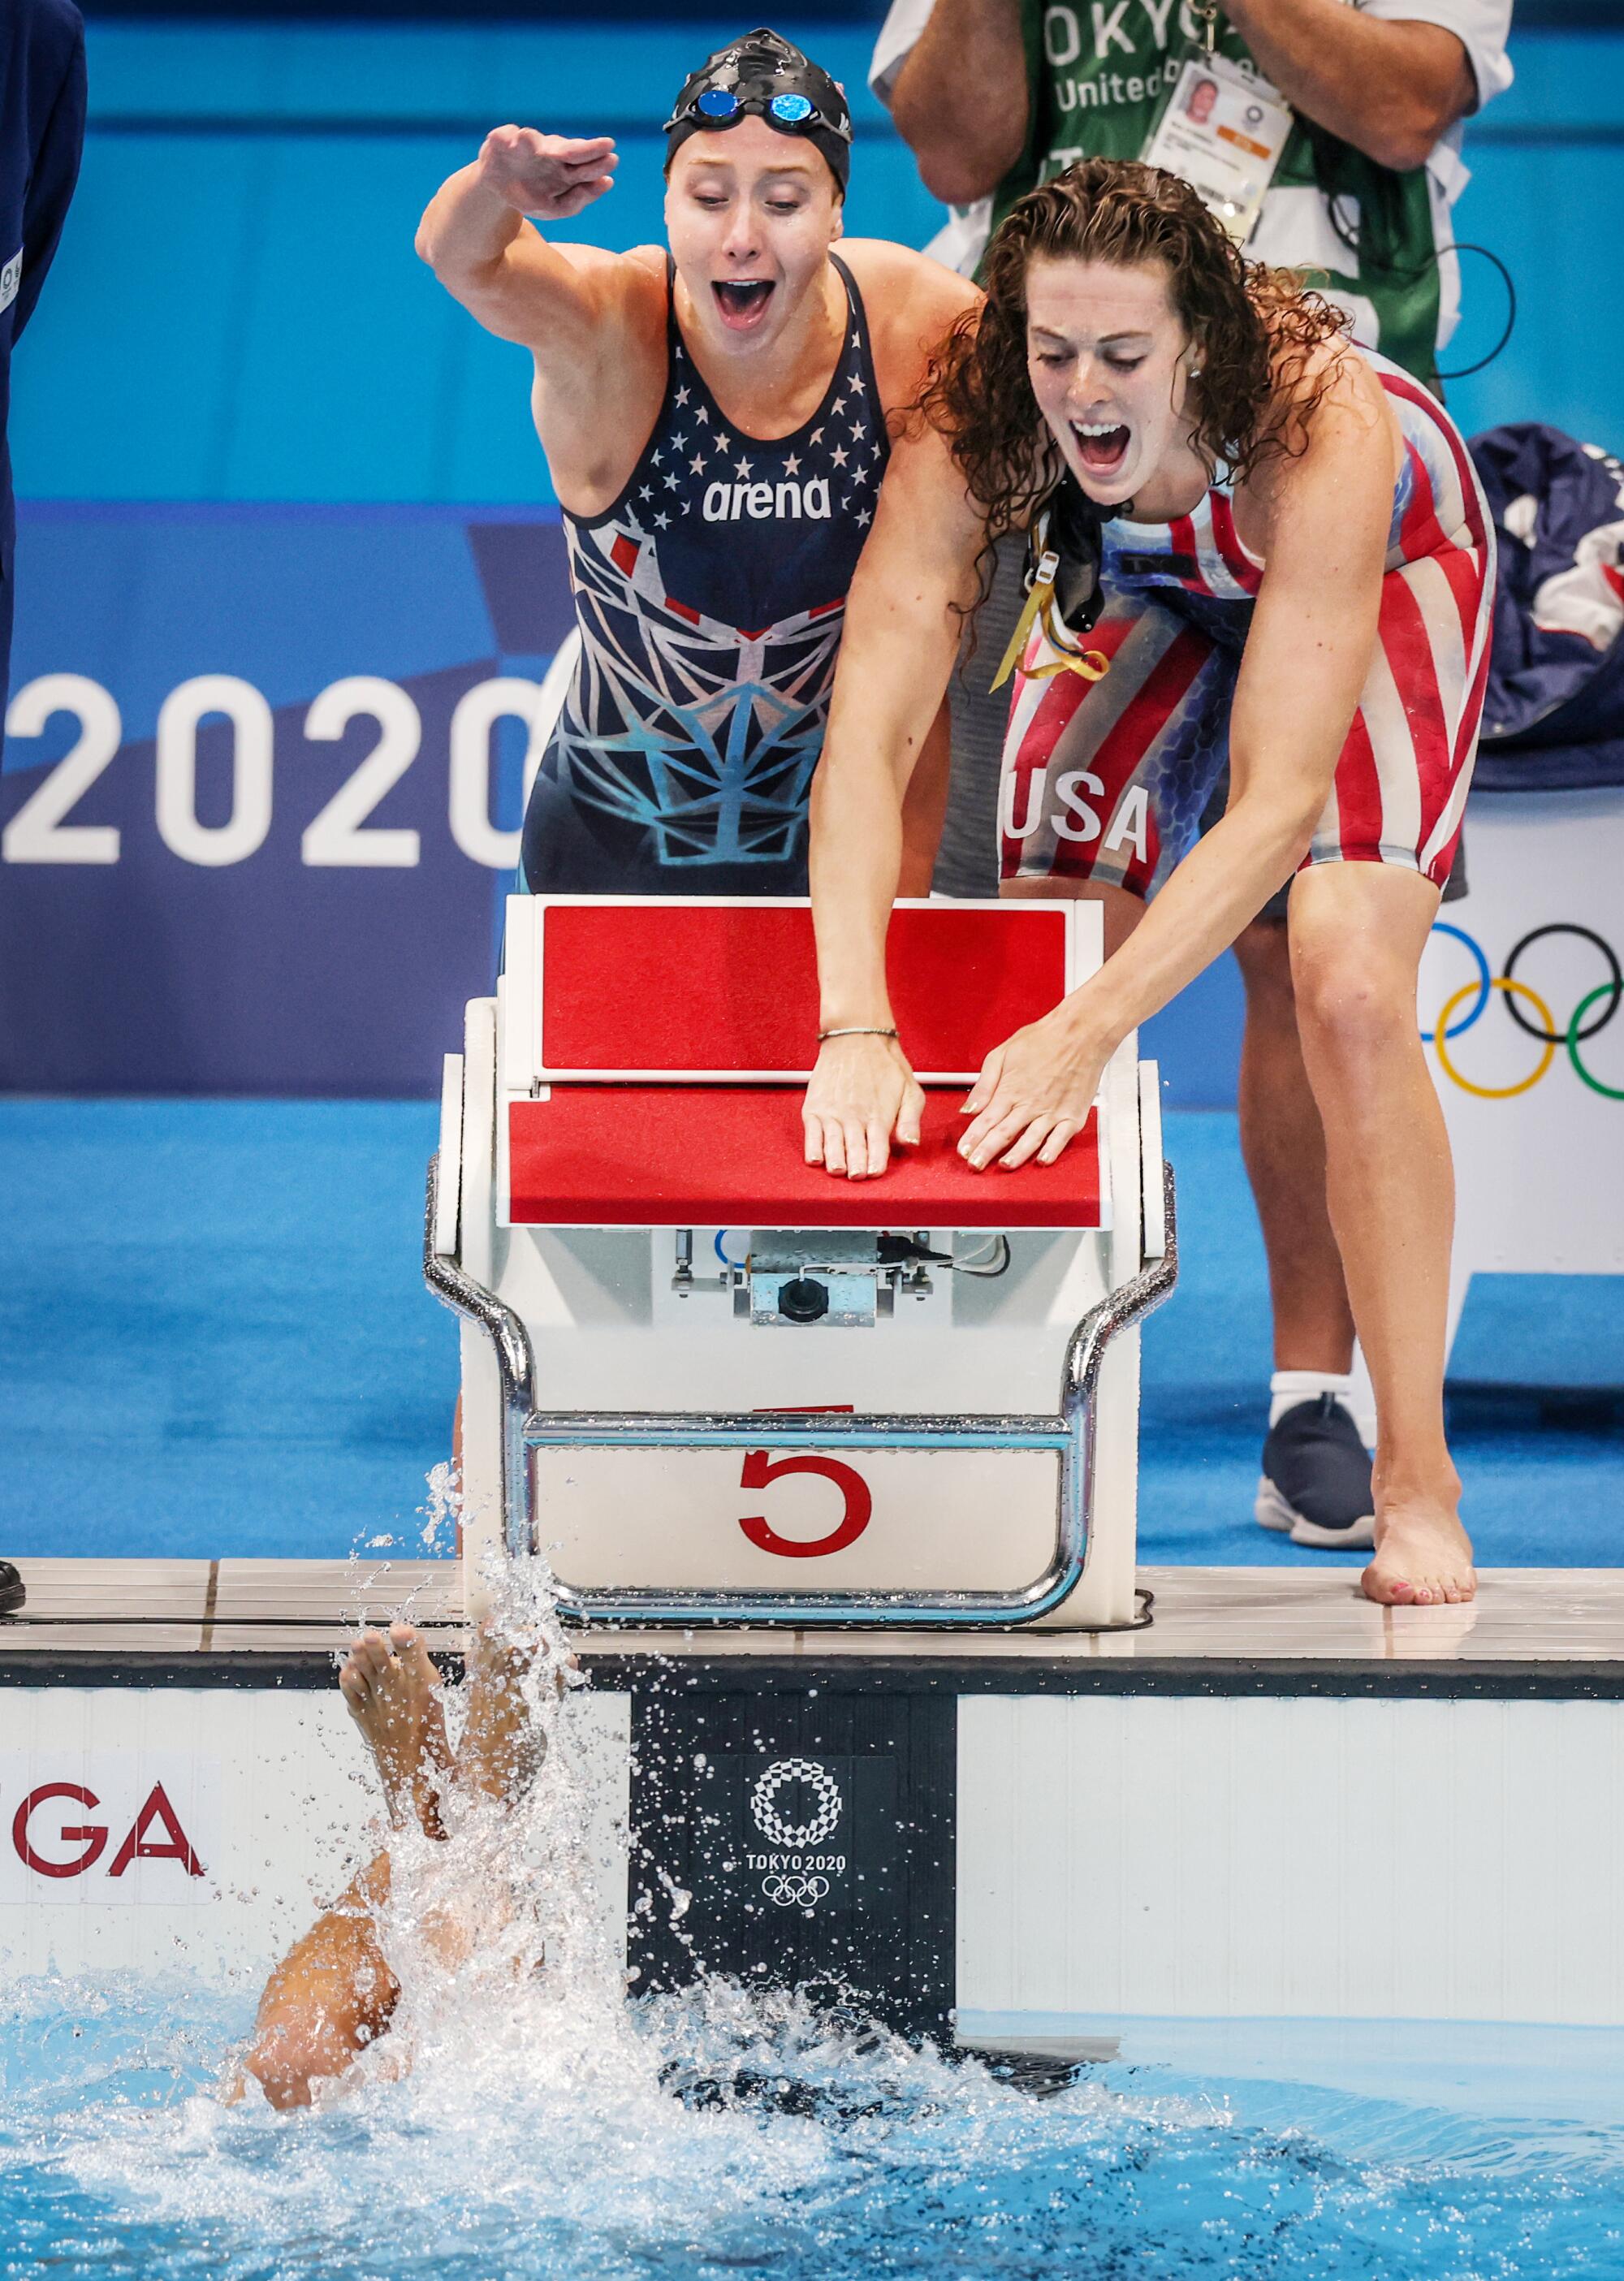 U.S. teammates Paige Madden, left, and Allison Schmitt cheer on Katie Ledecky in the final of the 800-meter relay.